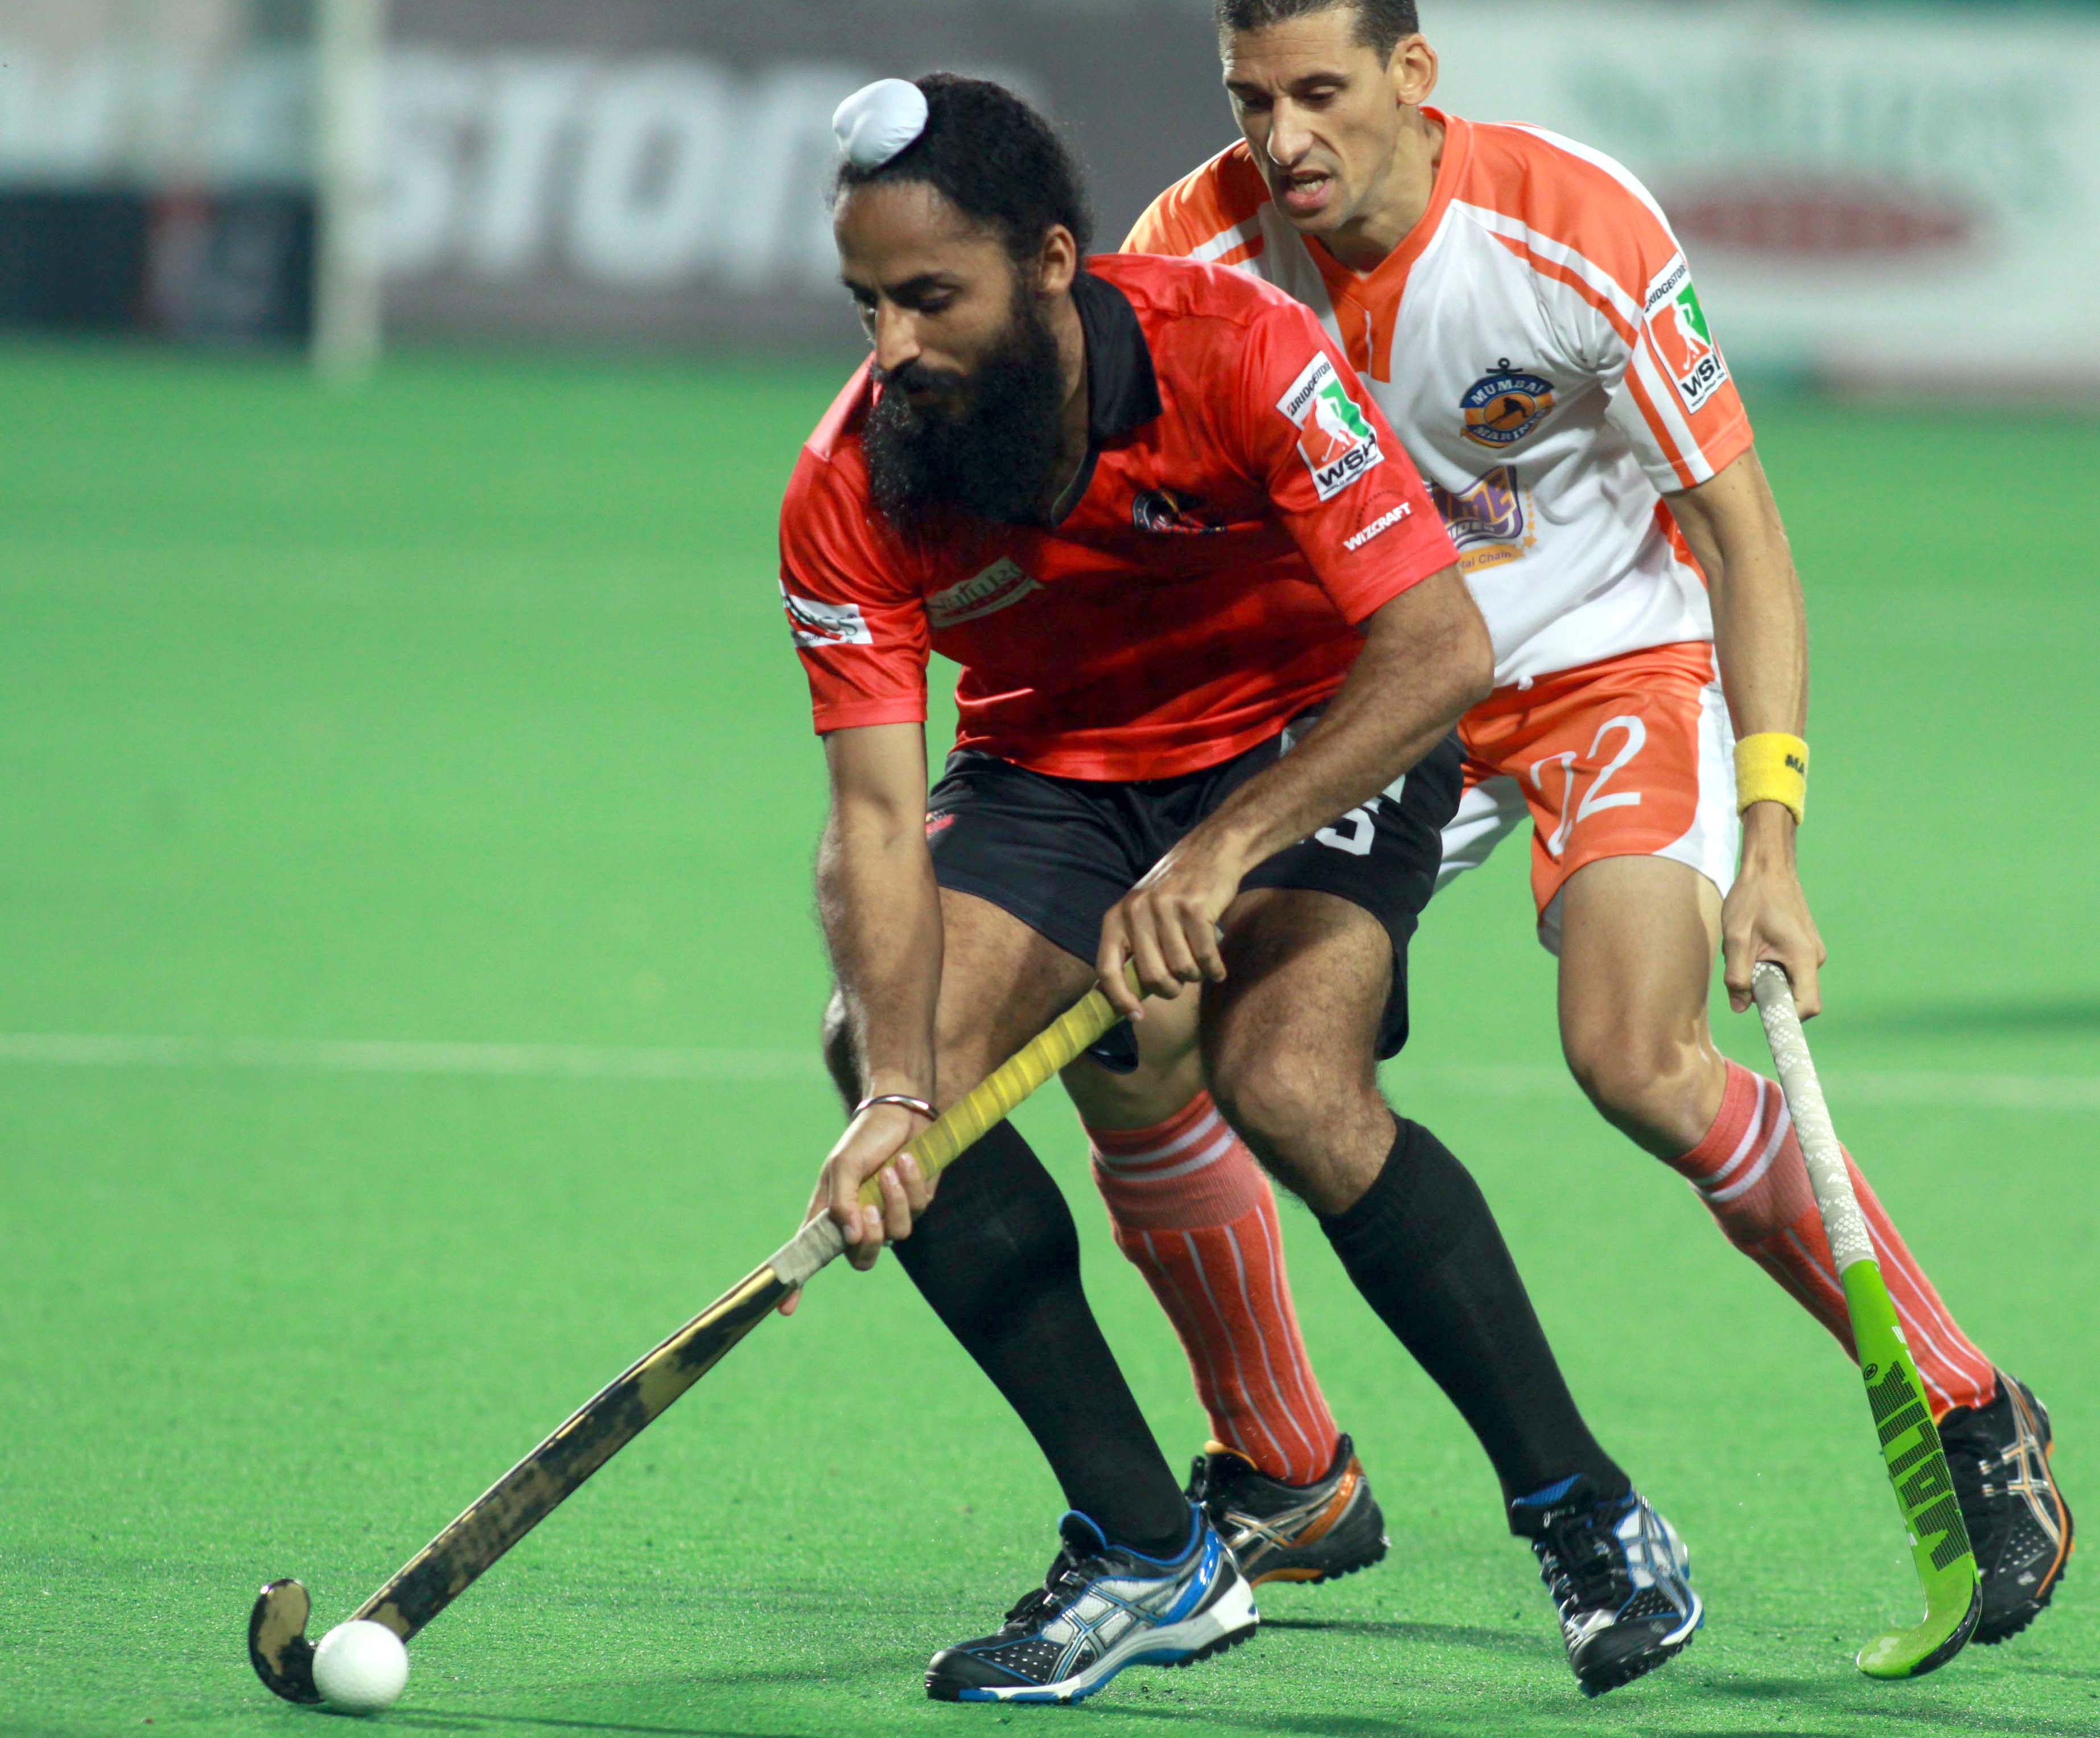 Bridgestone World Series Hockey 2012: Rajpal Singh(L) from Delhi Wizards & Clyde Abrahams(R) from Mumbai Marines team in action during their match at Delhi on 19th March 2012.